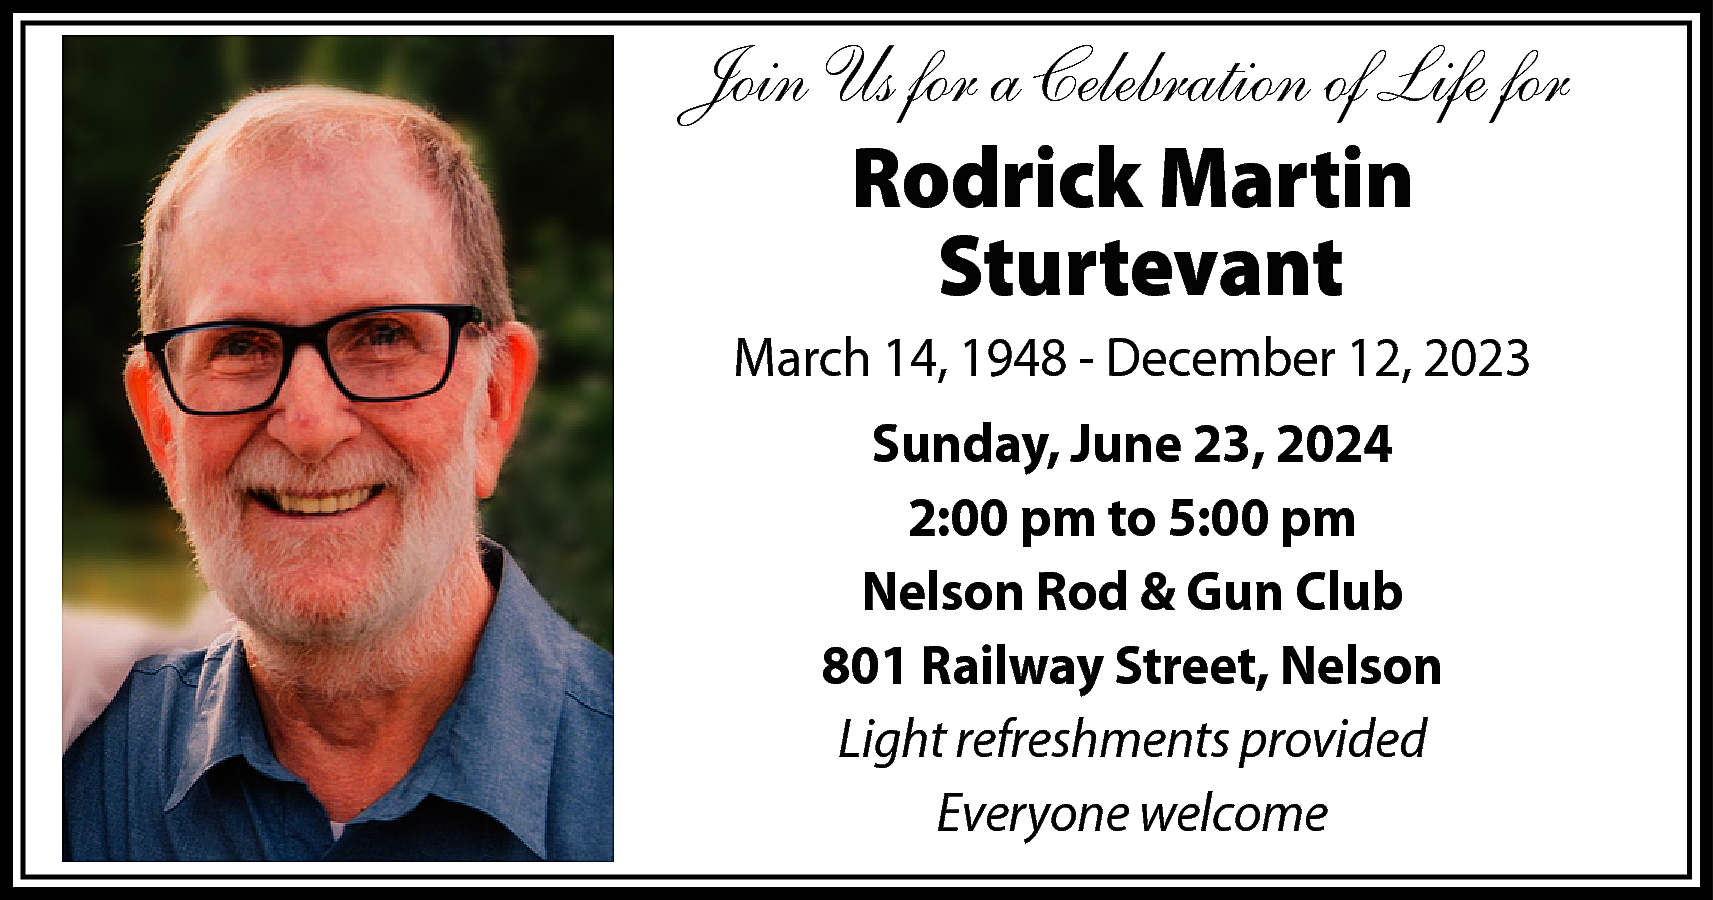 Join Us for a Celebration  Join Us for a Celebration of Life for    Rodrick Martin  Sturtevant    March 14, 1948 - December 12, 2023  Sunday, June 23, 2024  2:00 pm to 5:00 pm  Nelson Rod & Gun Club  801 Railway Street, Nelson  Light refreshments provided  Everyone welcome    